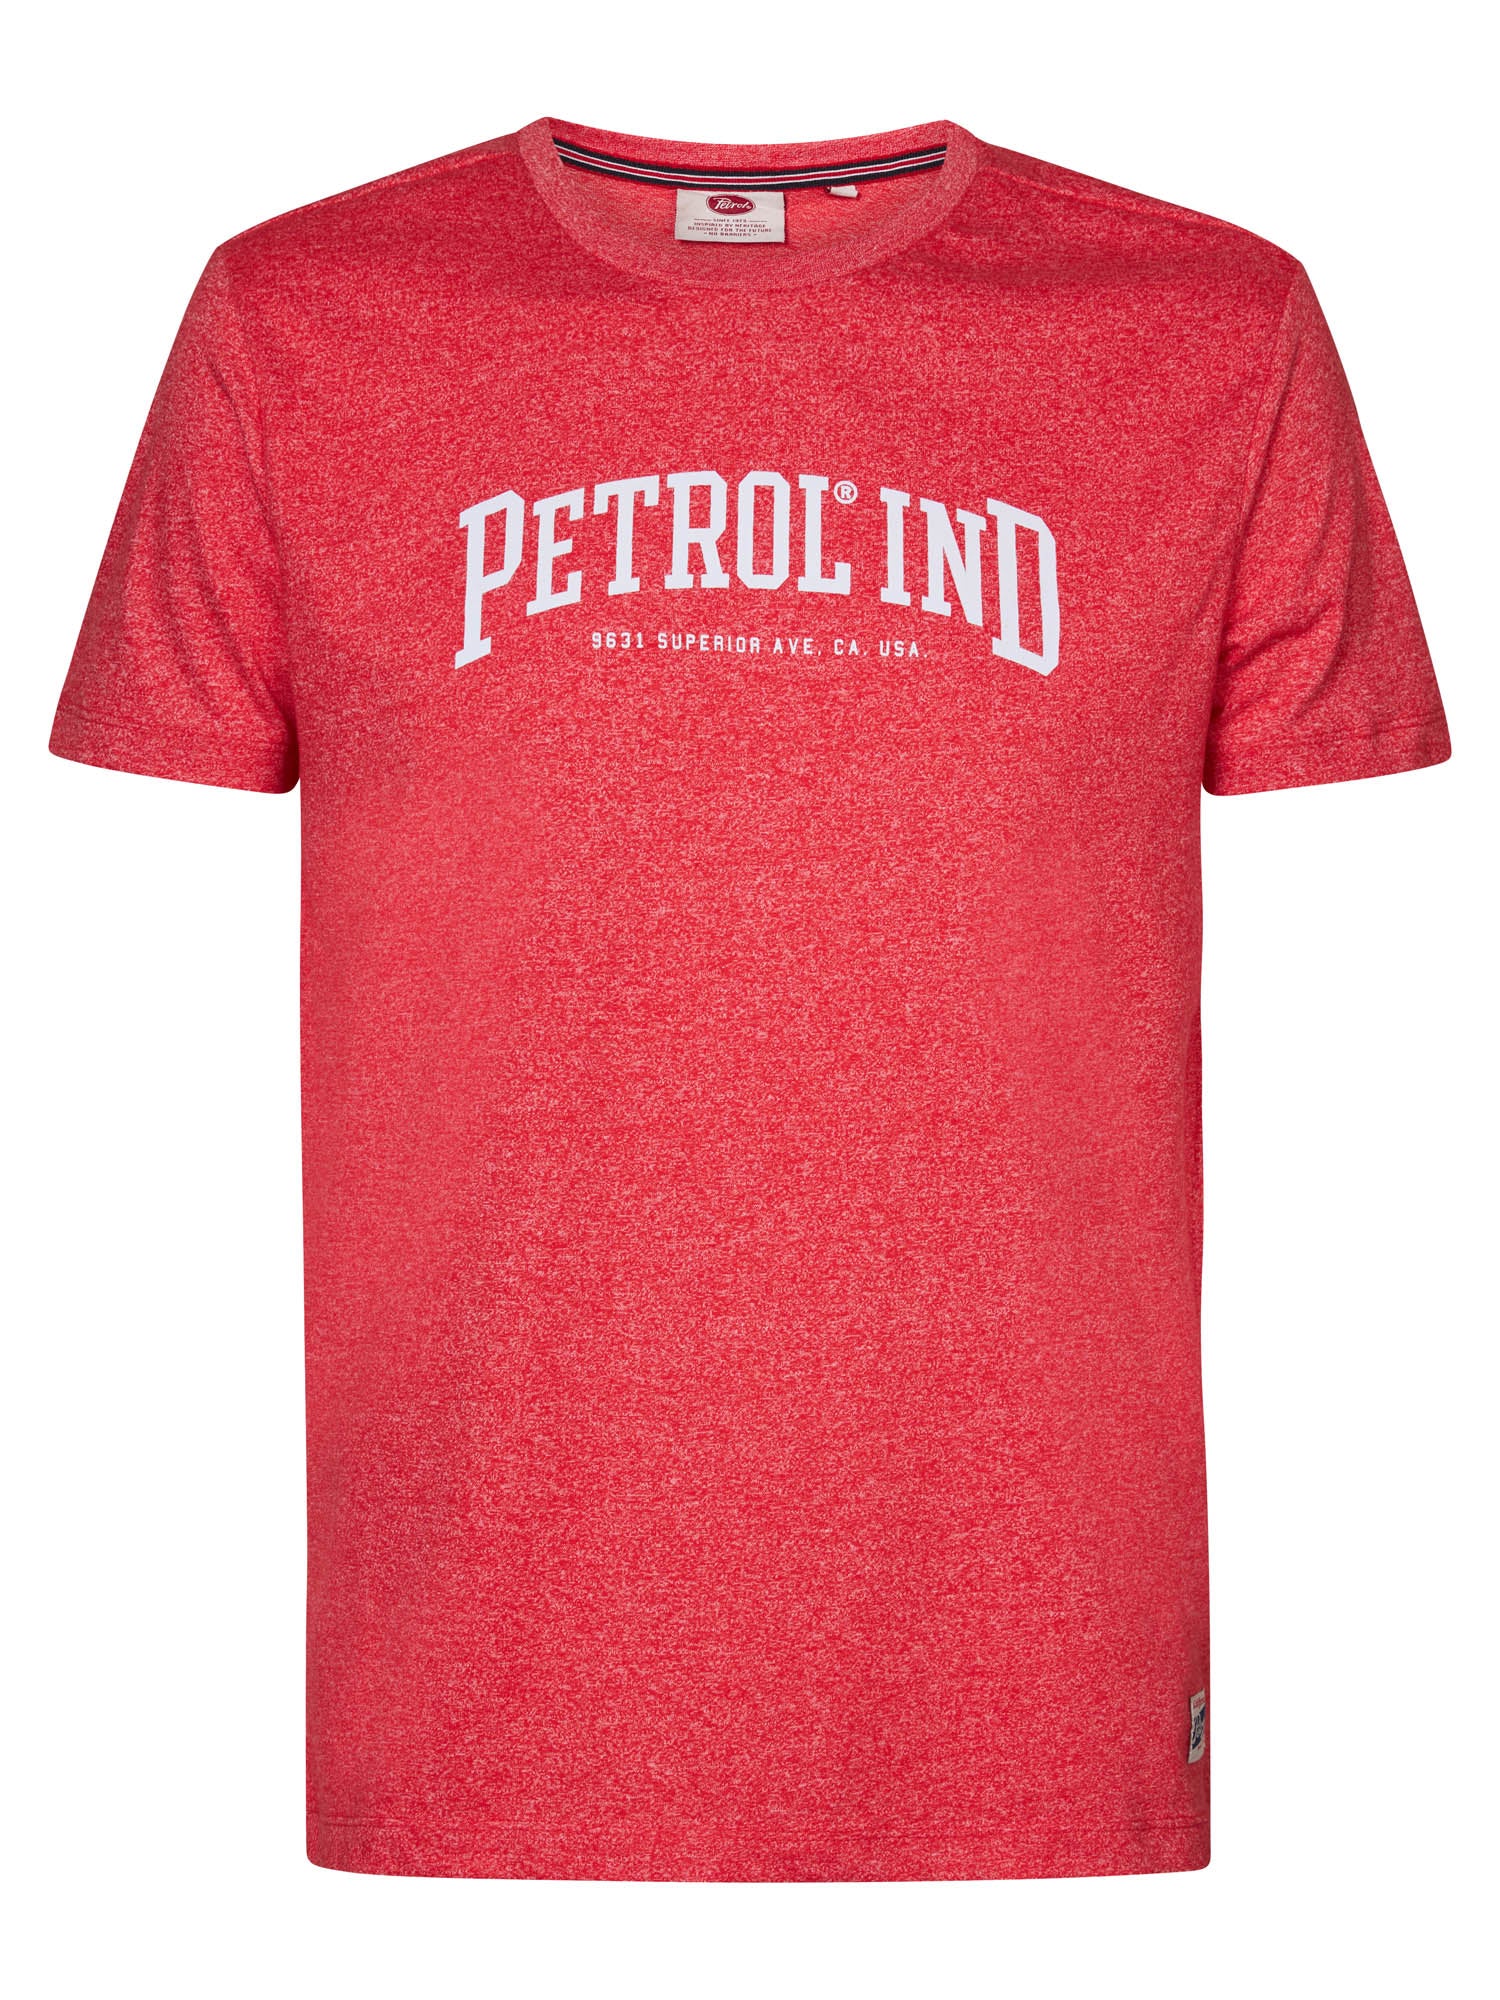 Petrol Industries Logo T-Shirt Imperial Red - M